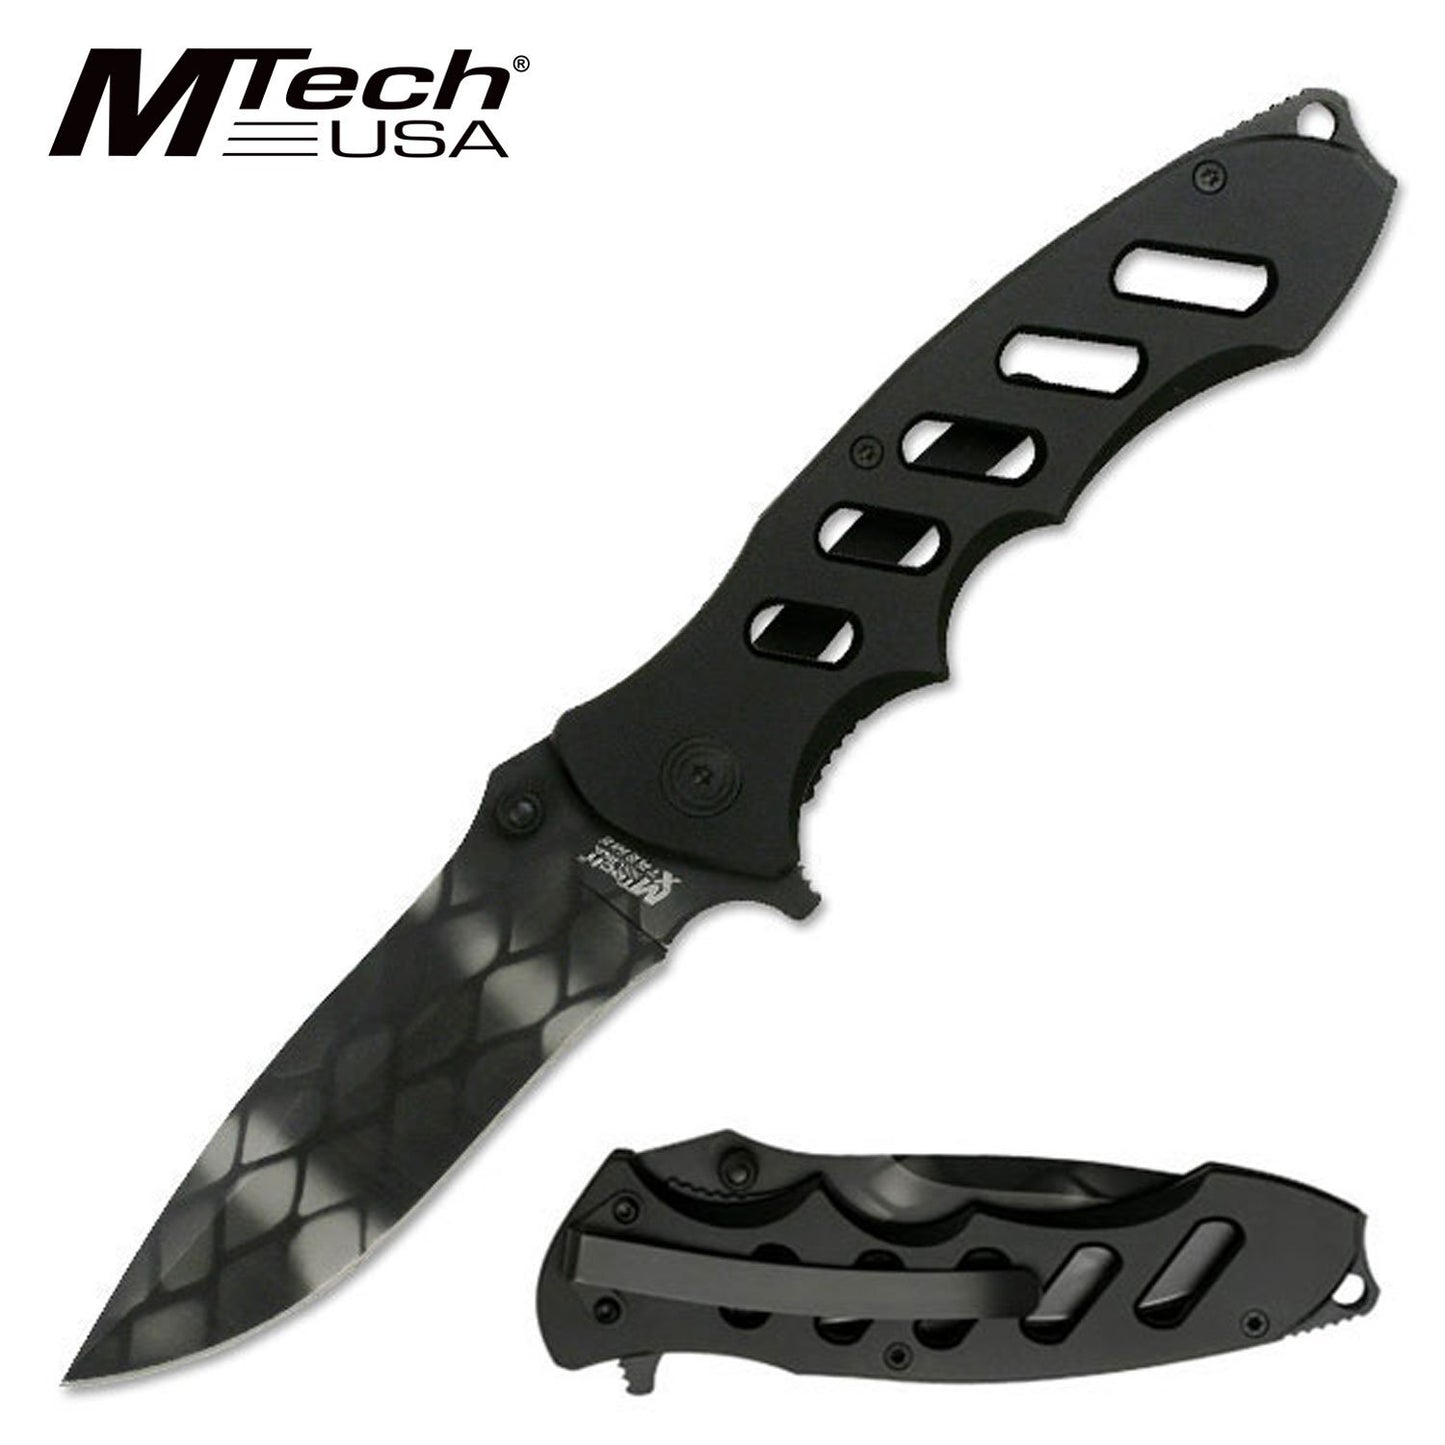 Mtech Mtech Linerlock Web-Etched Drop Point Folding Knife - 8.75 Inches Overall #mx-8027A Dark Slate Gray